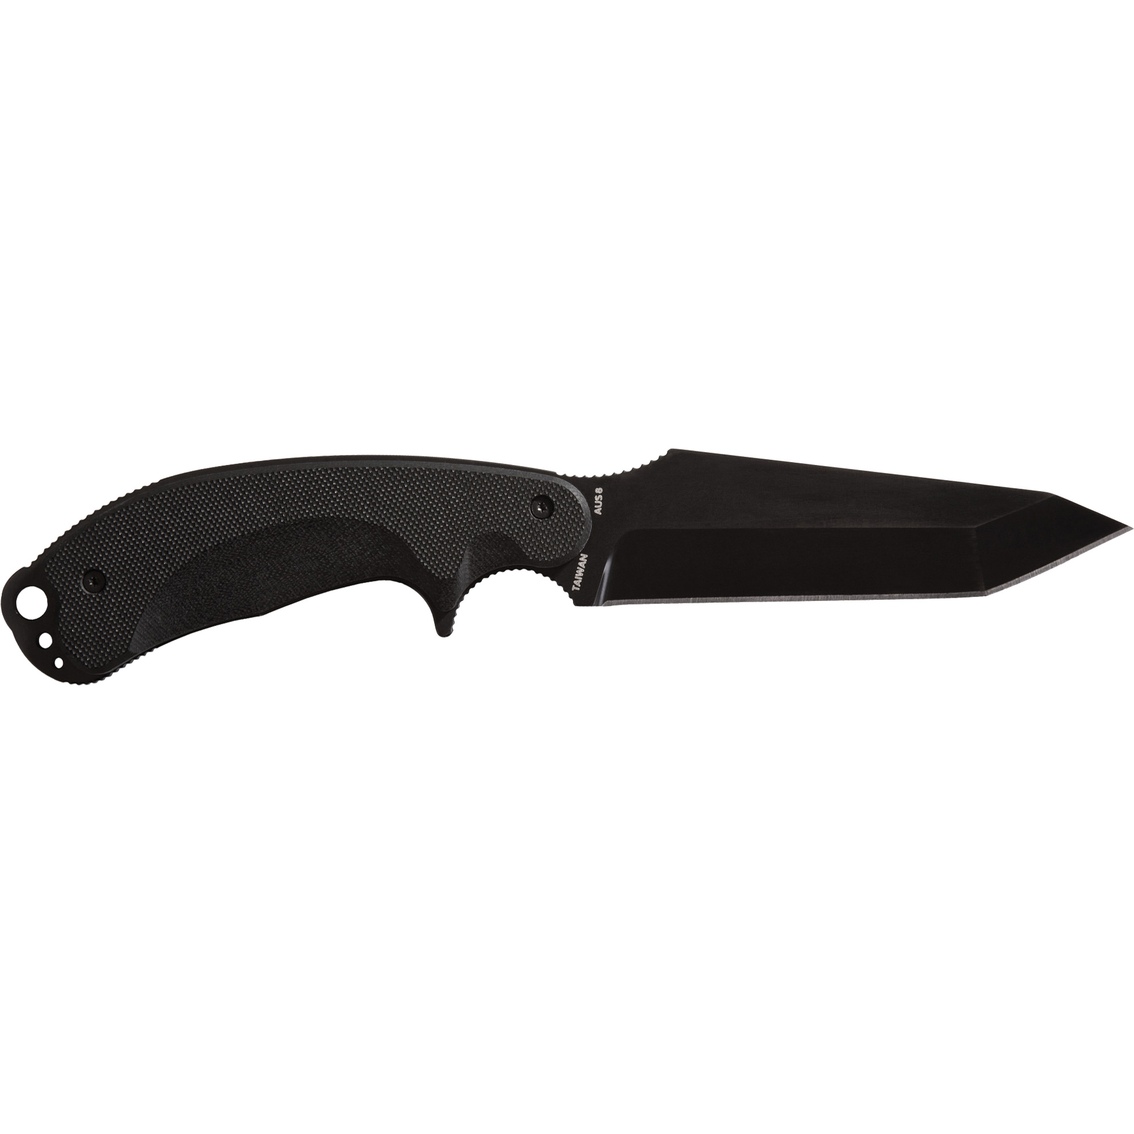 5.11 Tactical Tanto Surge Fixed Blade Knife - Image 2 of 4